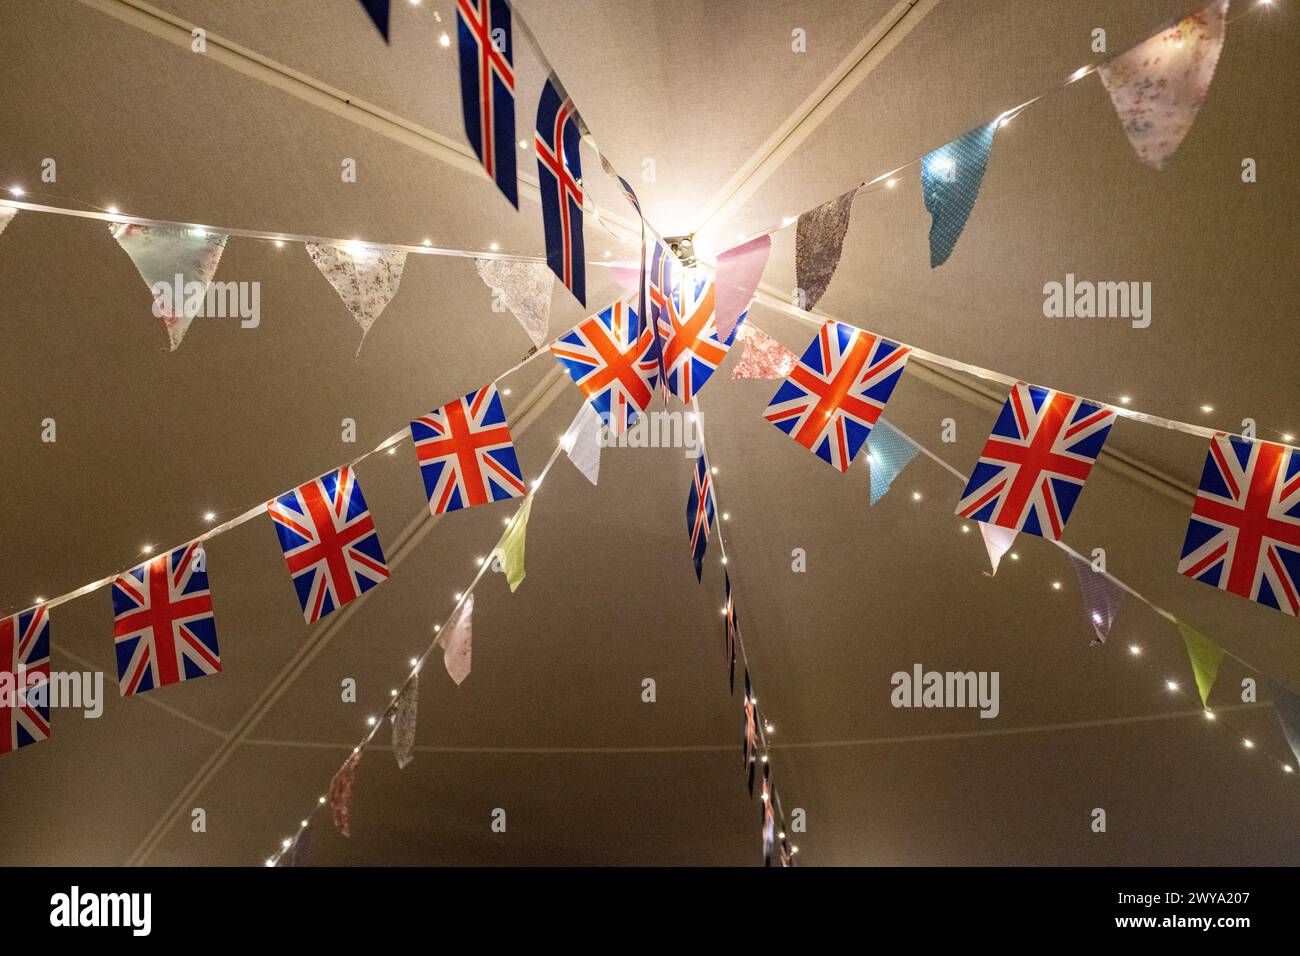 British Union Jack bunting flags decoration at a wedding at Dulwich Picture Gallery in London, UK Stock Photo